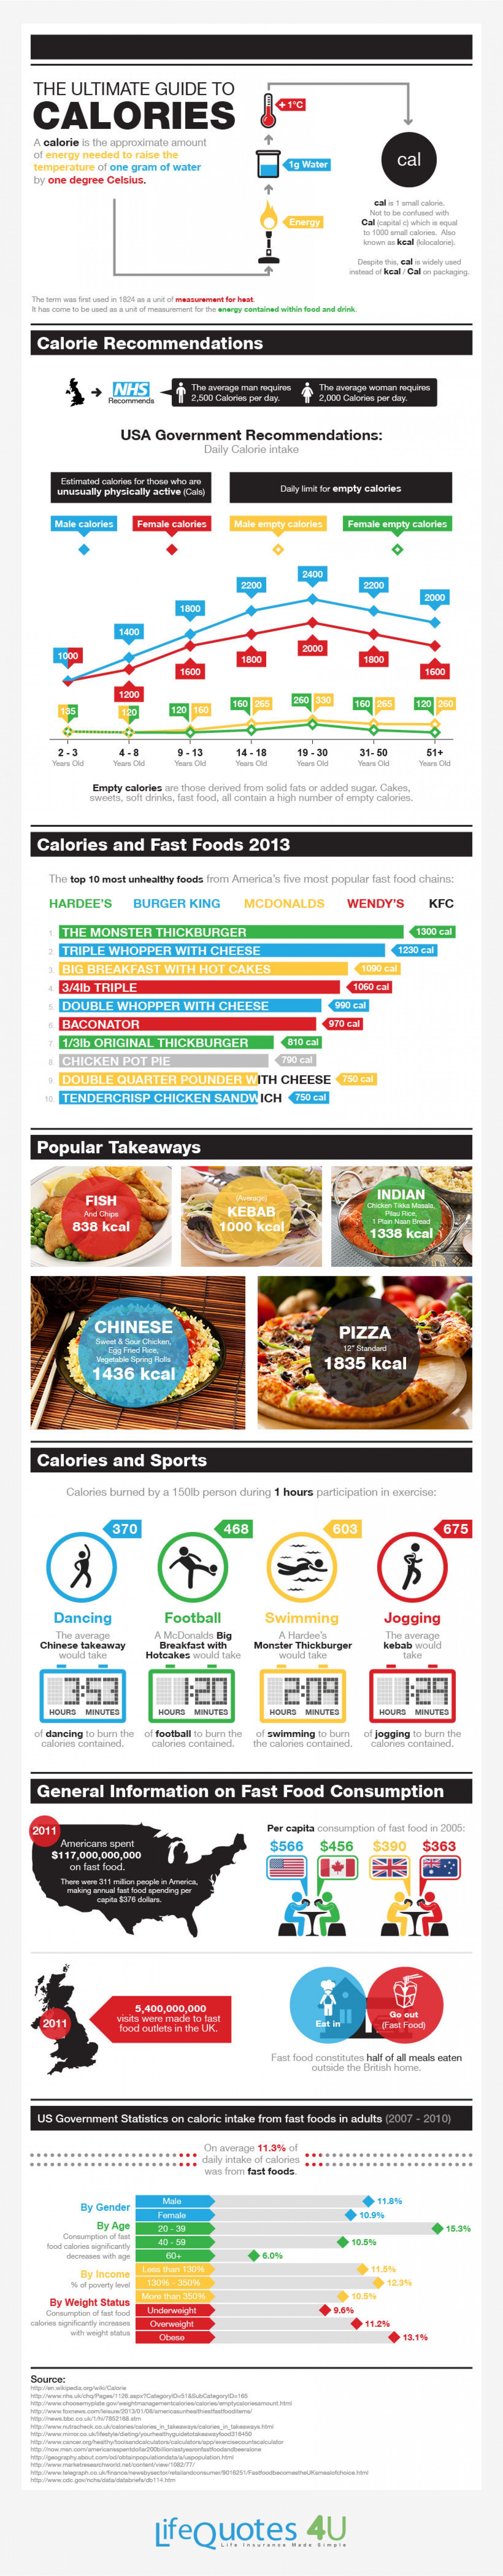 the-ultimate-guide-to-calories_519fdddf87328_w1500